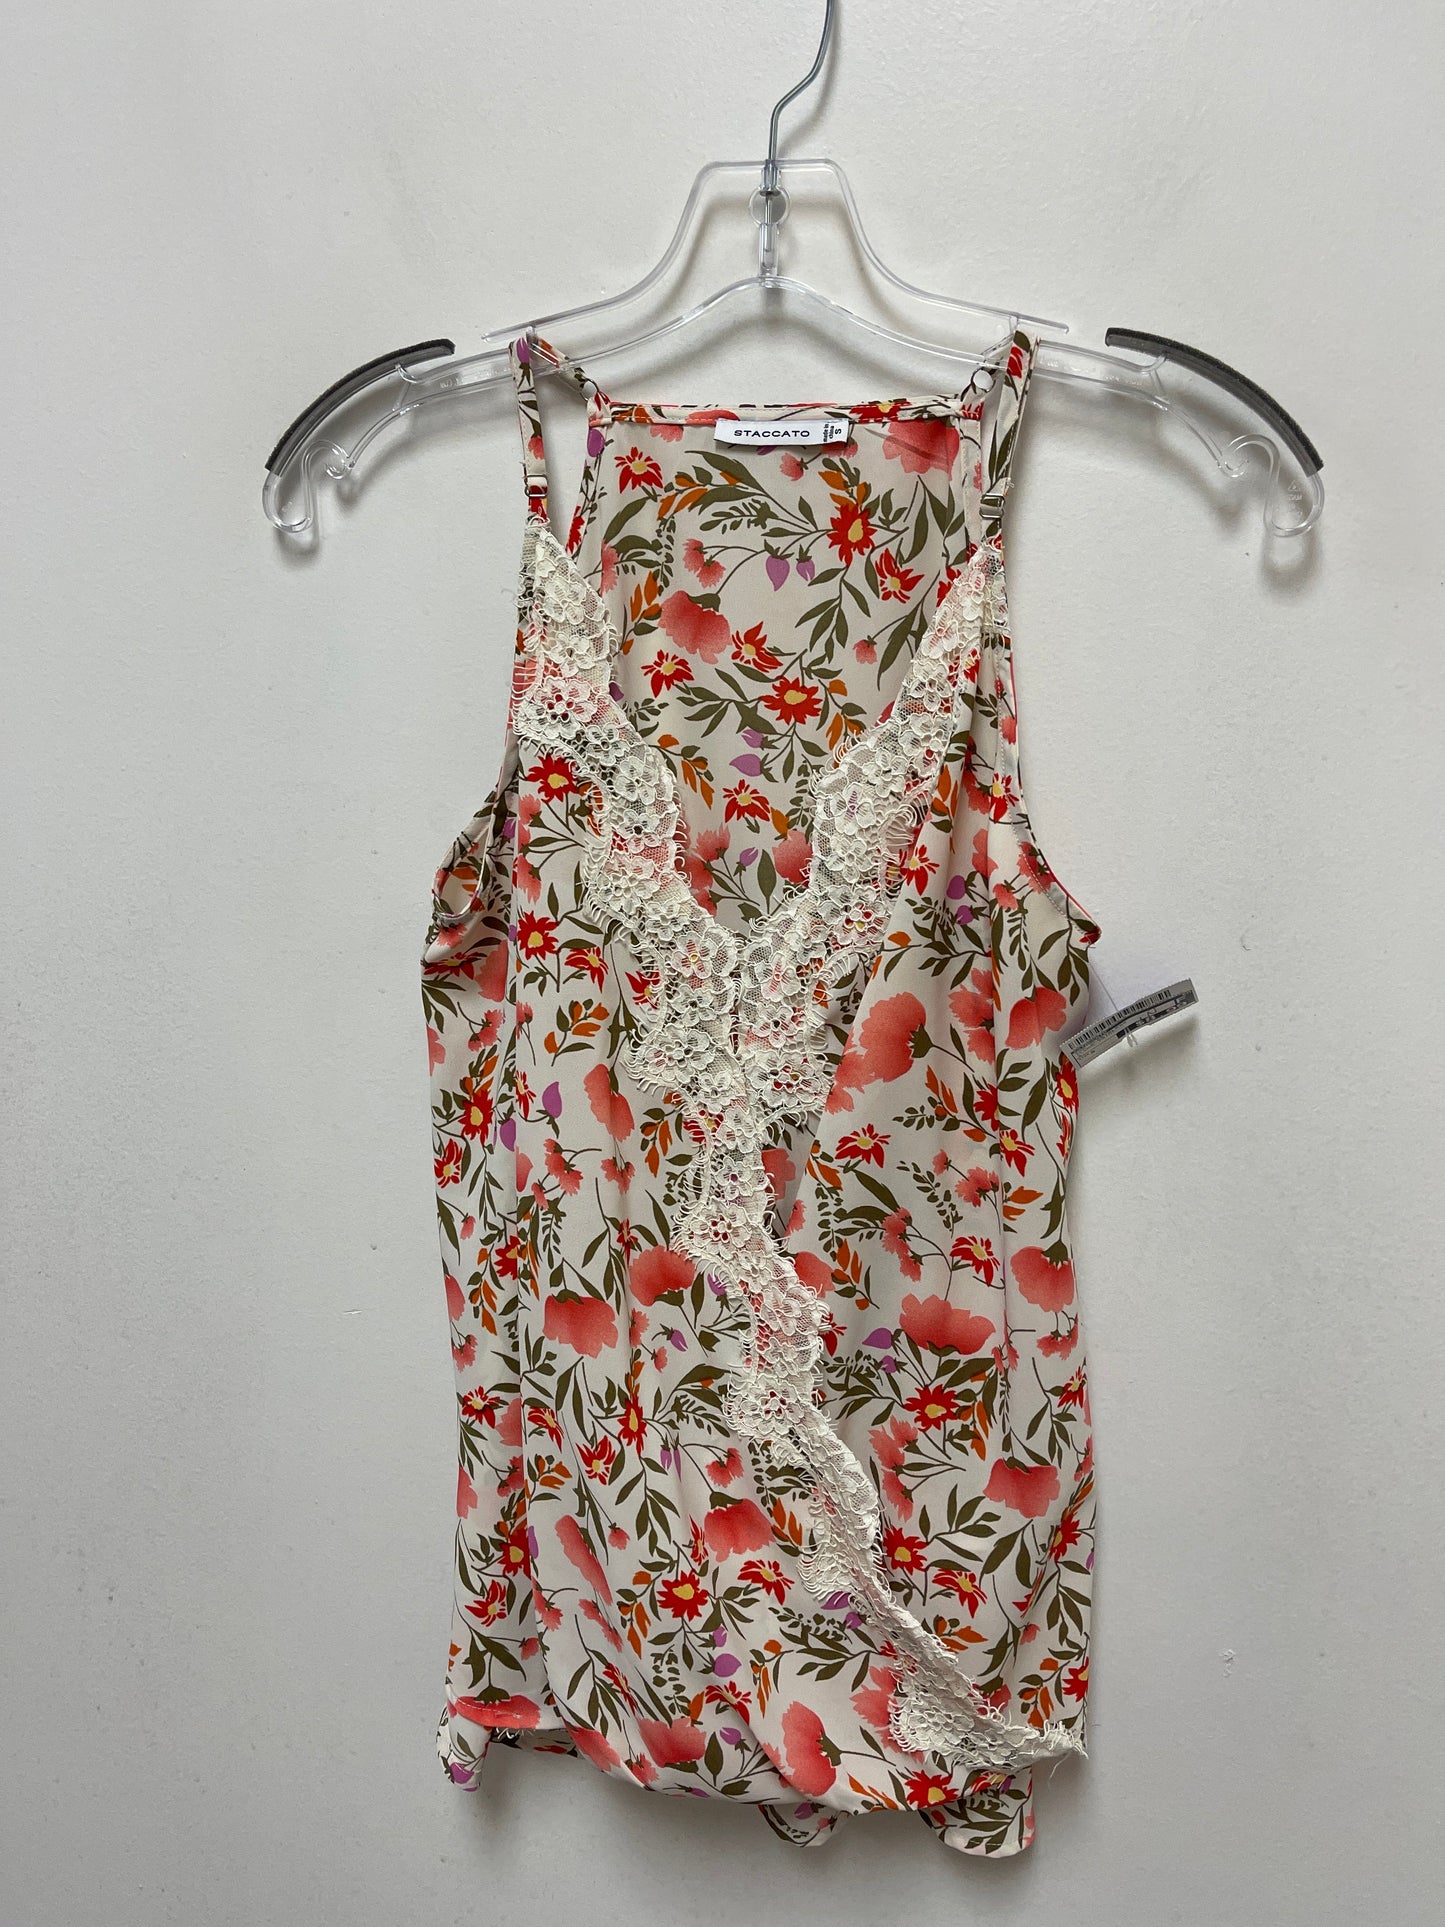 Floral Print Top Sleeveless Staccato, Size S